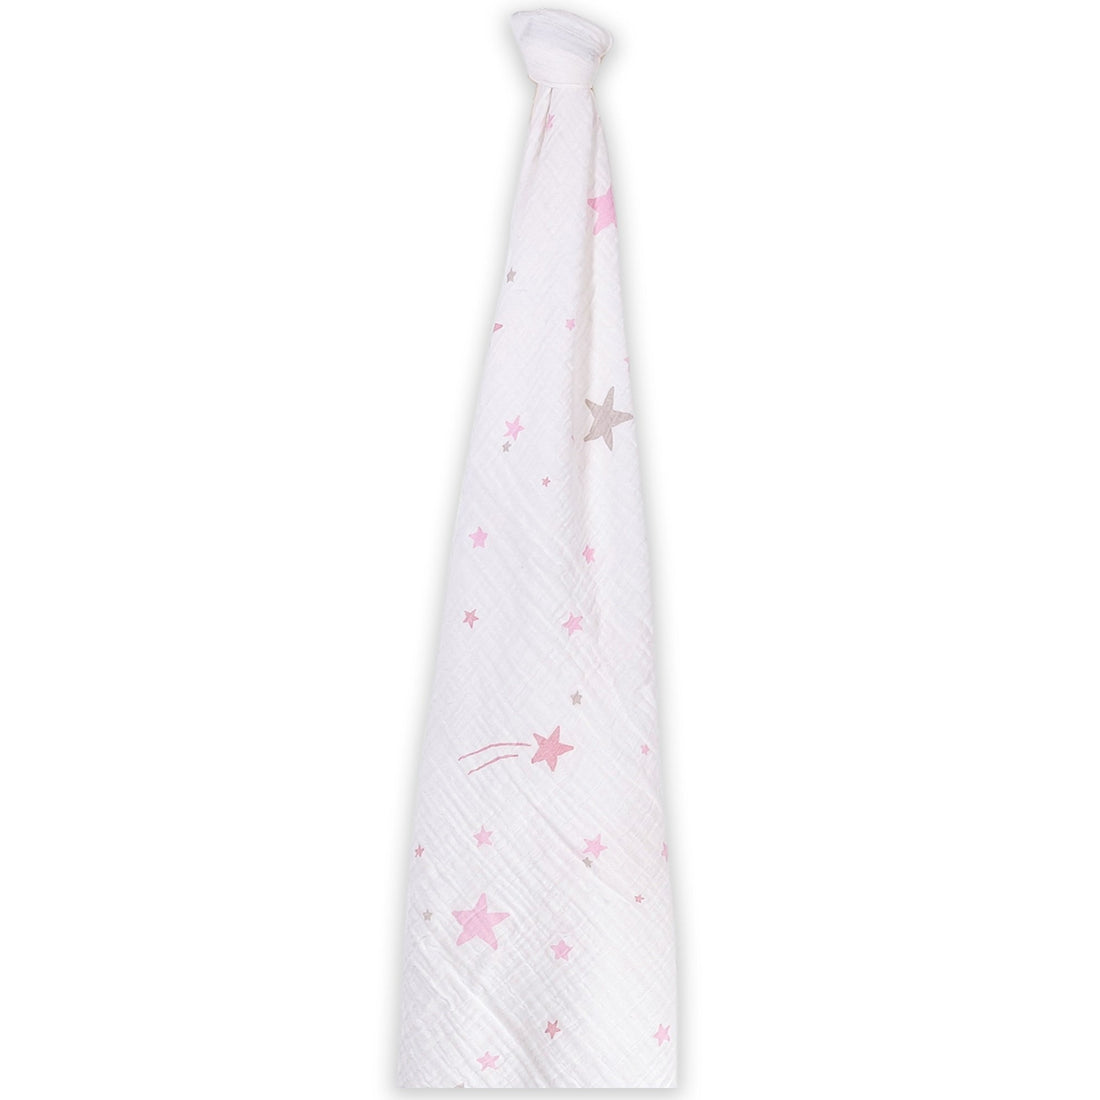 Momeasy Cotton Swaddling Blanket (Single Pack) - 100x120cm - Shooting Stars Pink